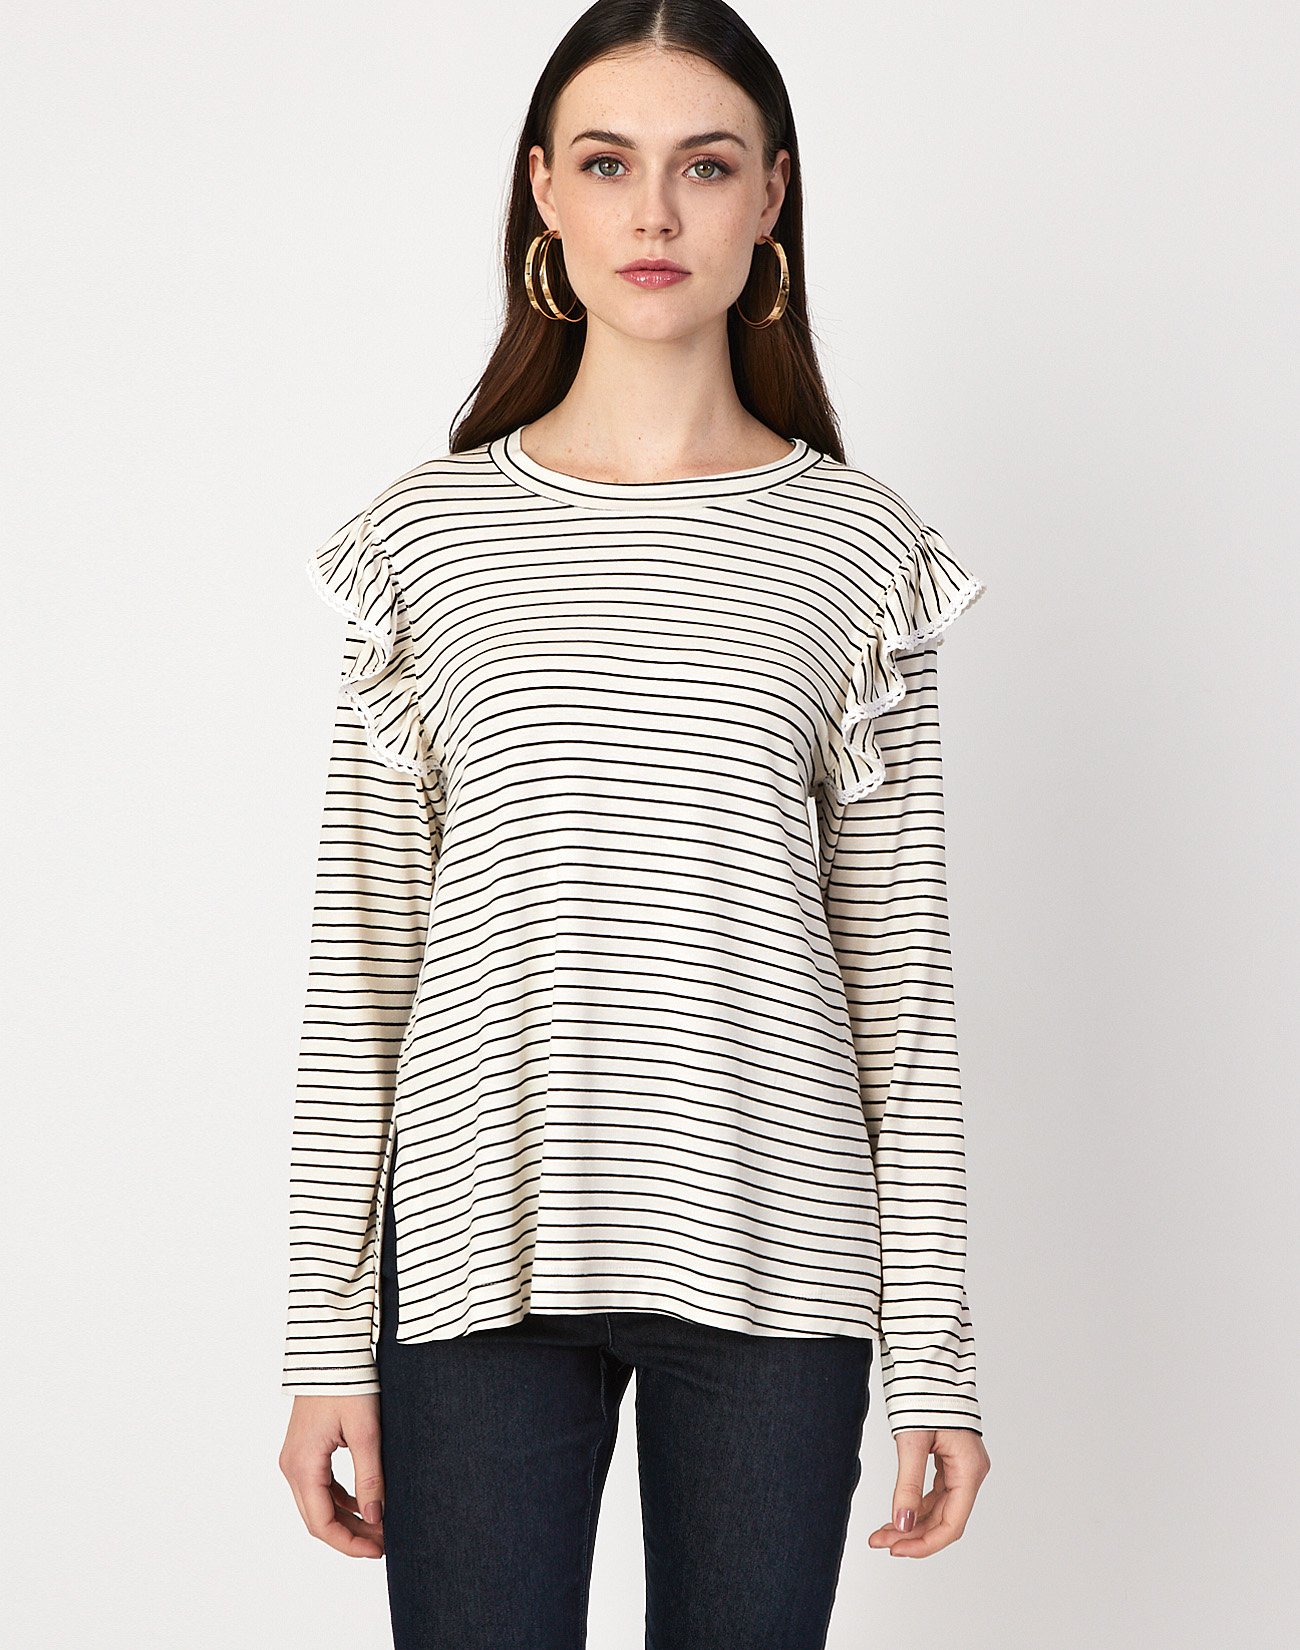 Striped top with ruffles